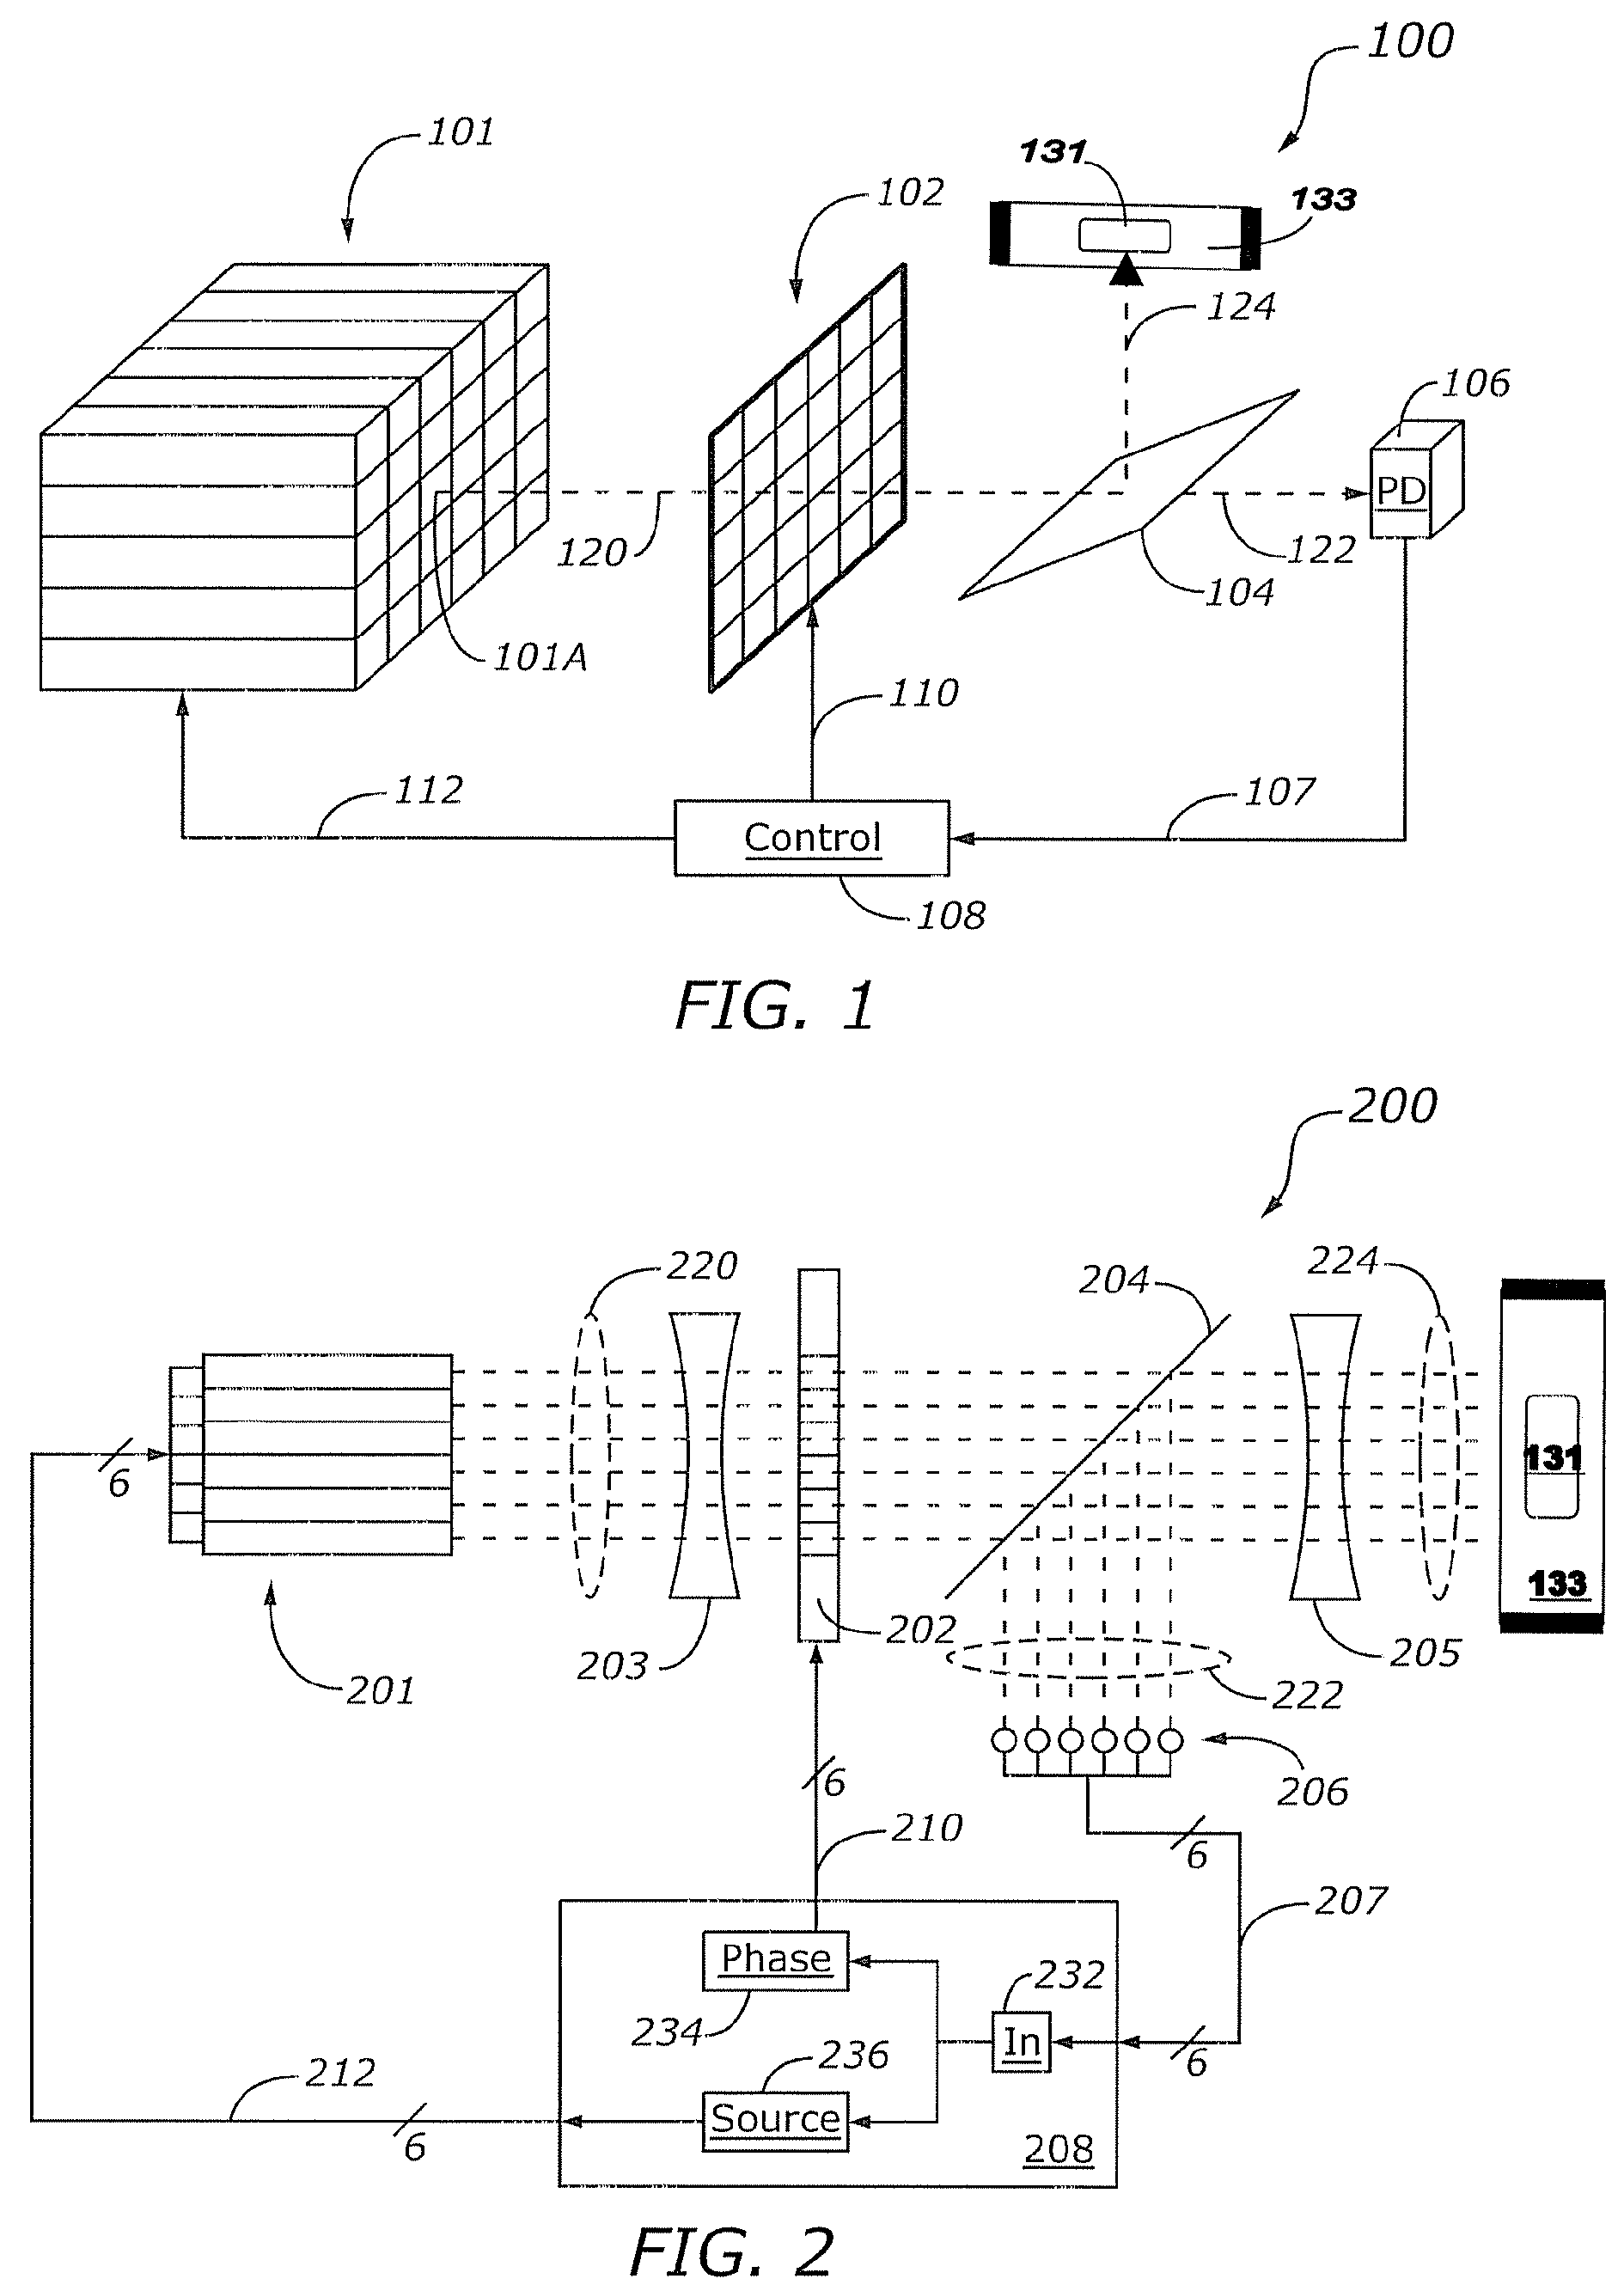 Methods and devices for forming a high-power coherent light beam